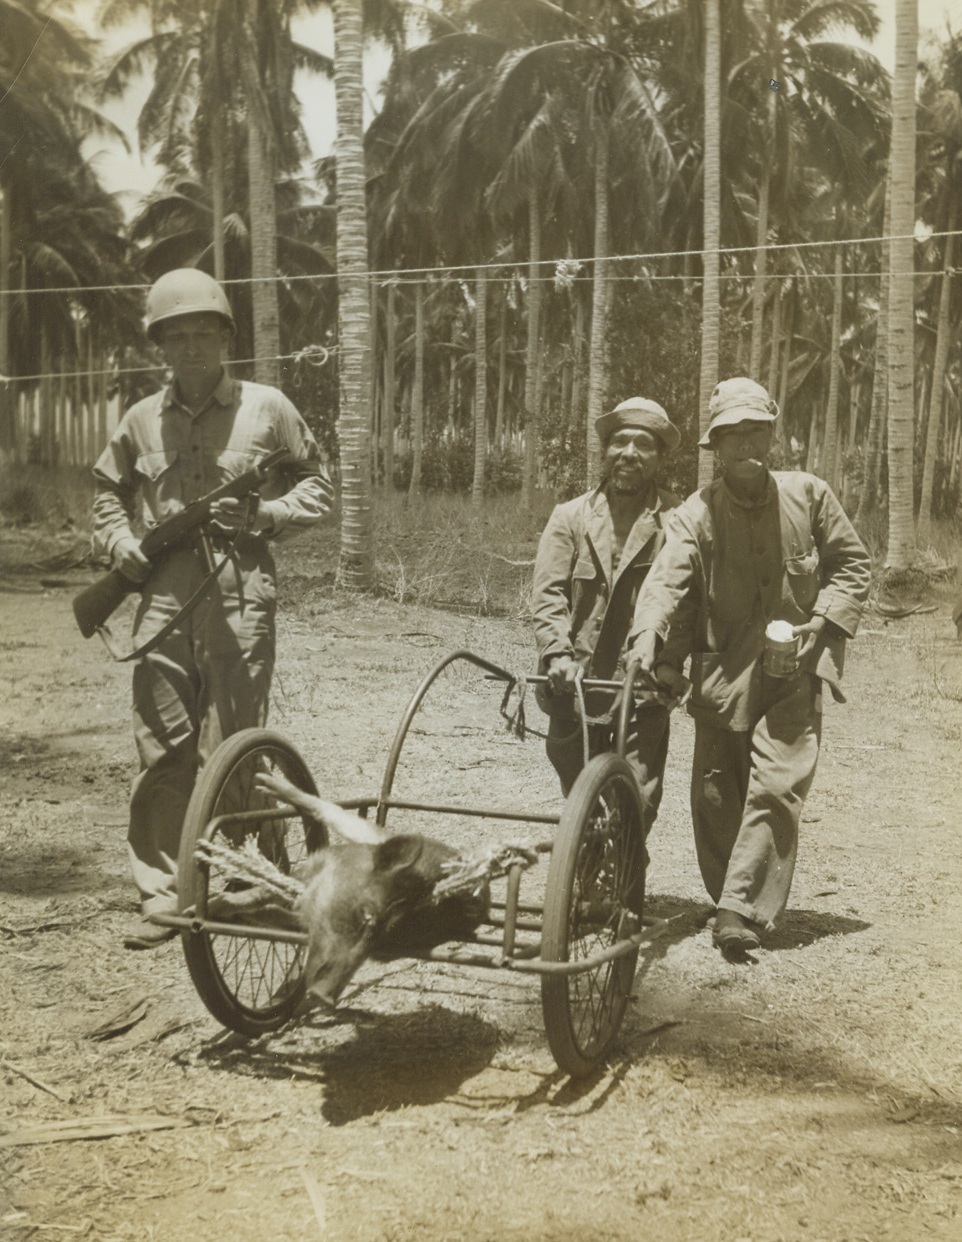 GUADALCANAL MARINES BRINGING HOME THE BACON, 10/14/1942. GUADALCANAL, SOLOMON ISLANDS—This remarkable photo indicates something of the daily life of U.S. Marines tenaciously defending their gains and advancing still more on Guadalcanal. Private M. G. Wiggins provides an armed escort for this wil pig, which he bagged near the Marine camp here. It provided his mates and himself with a welcome feed of fresh meat. Credit: Acme;